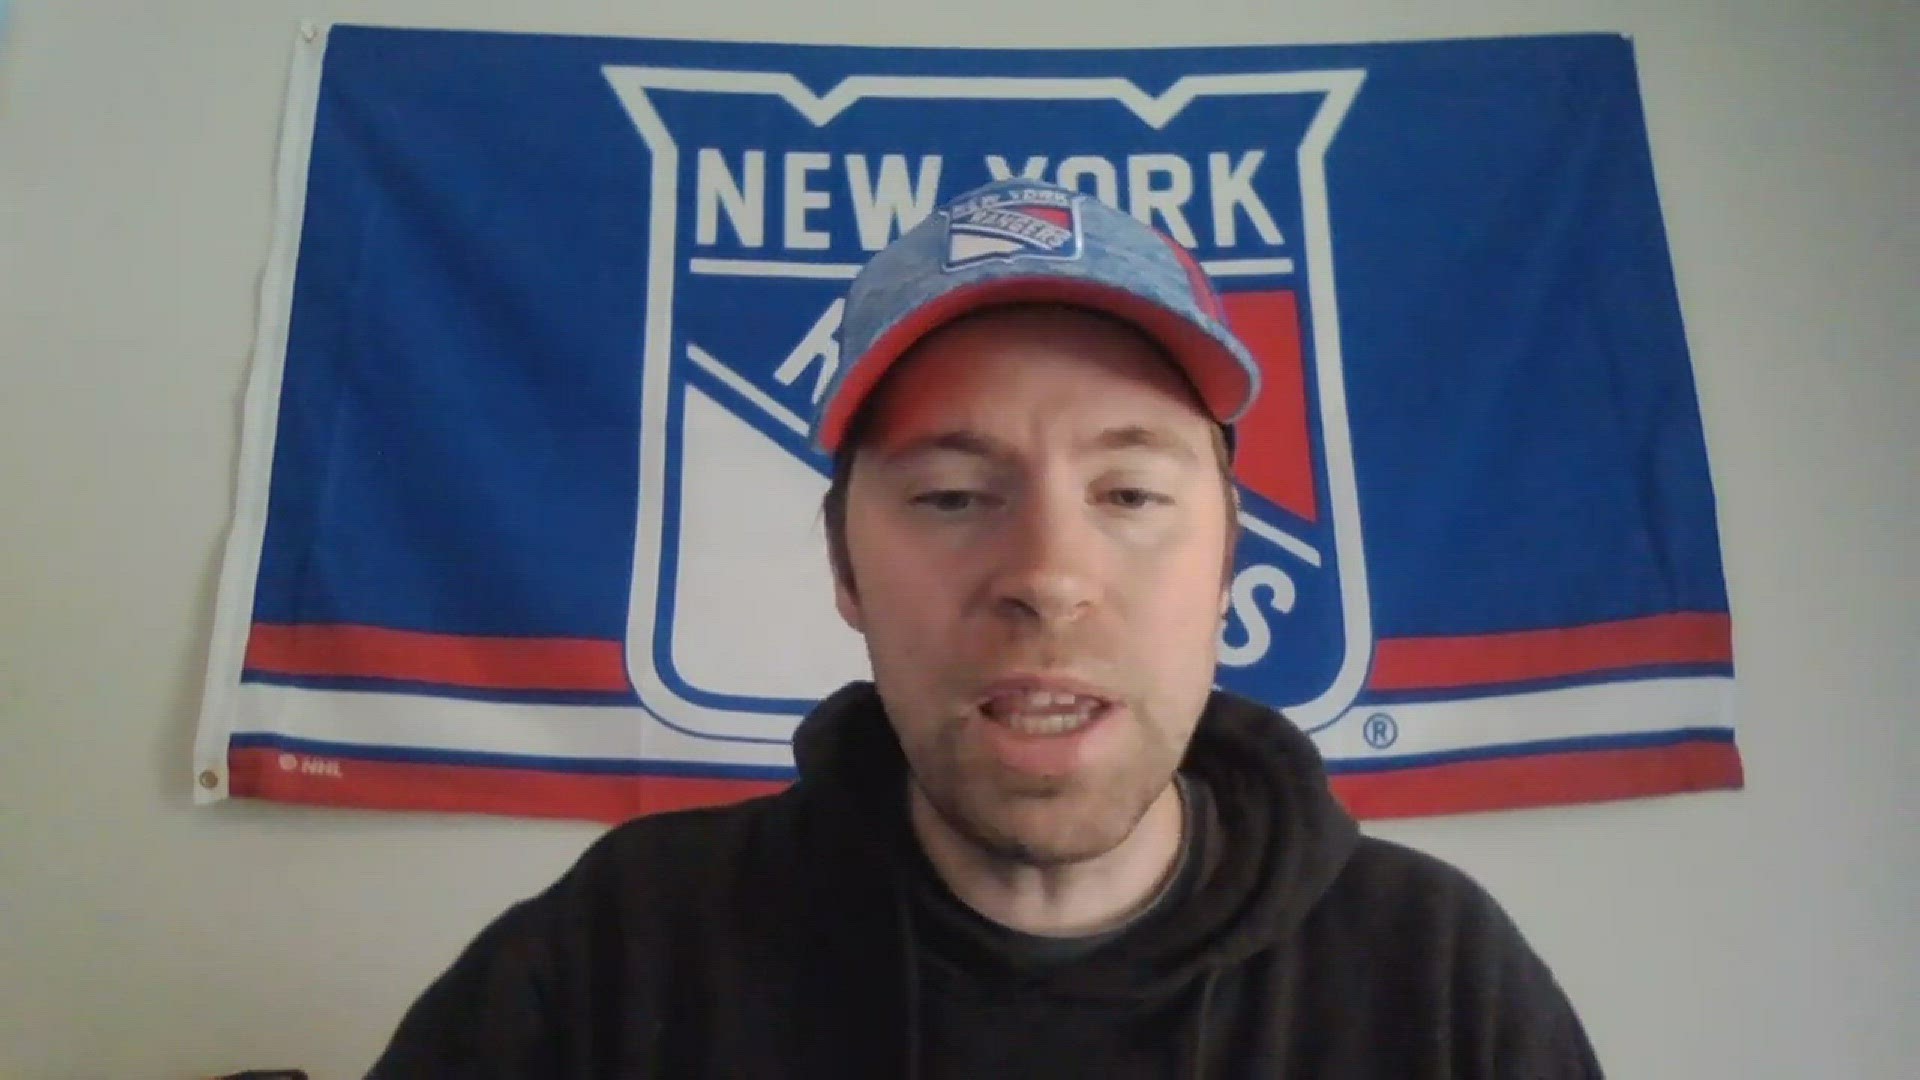 Patrick Kane Rangers jersey: How to get Rangers gear online after